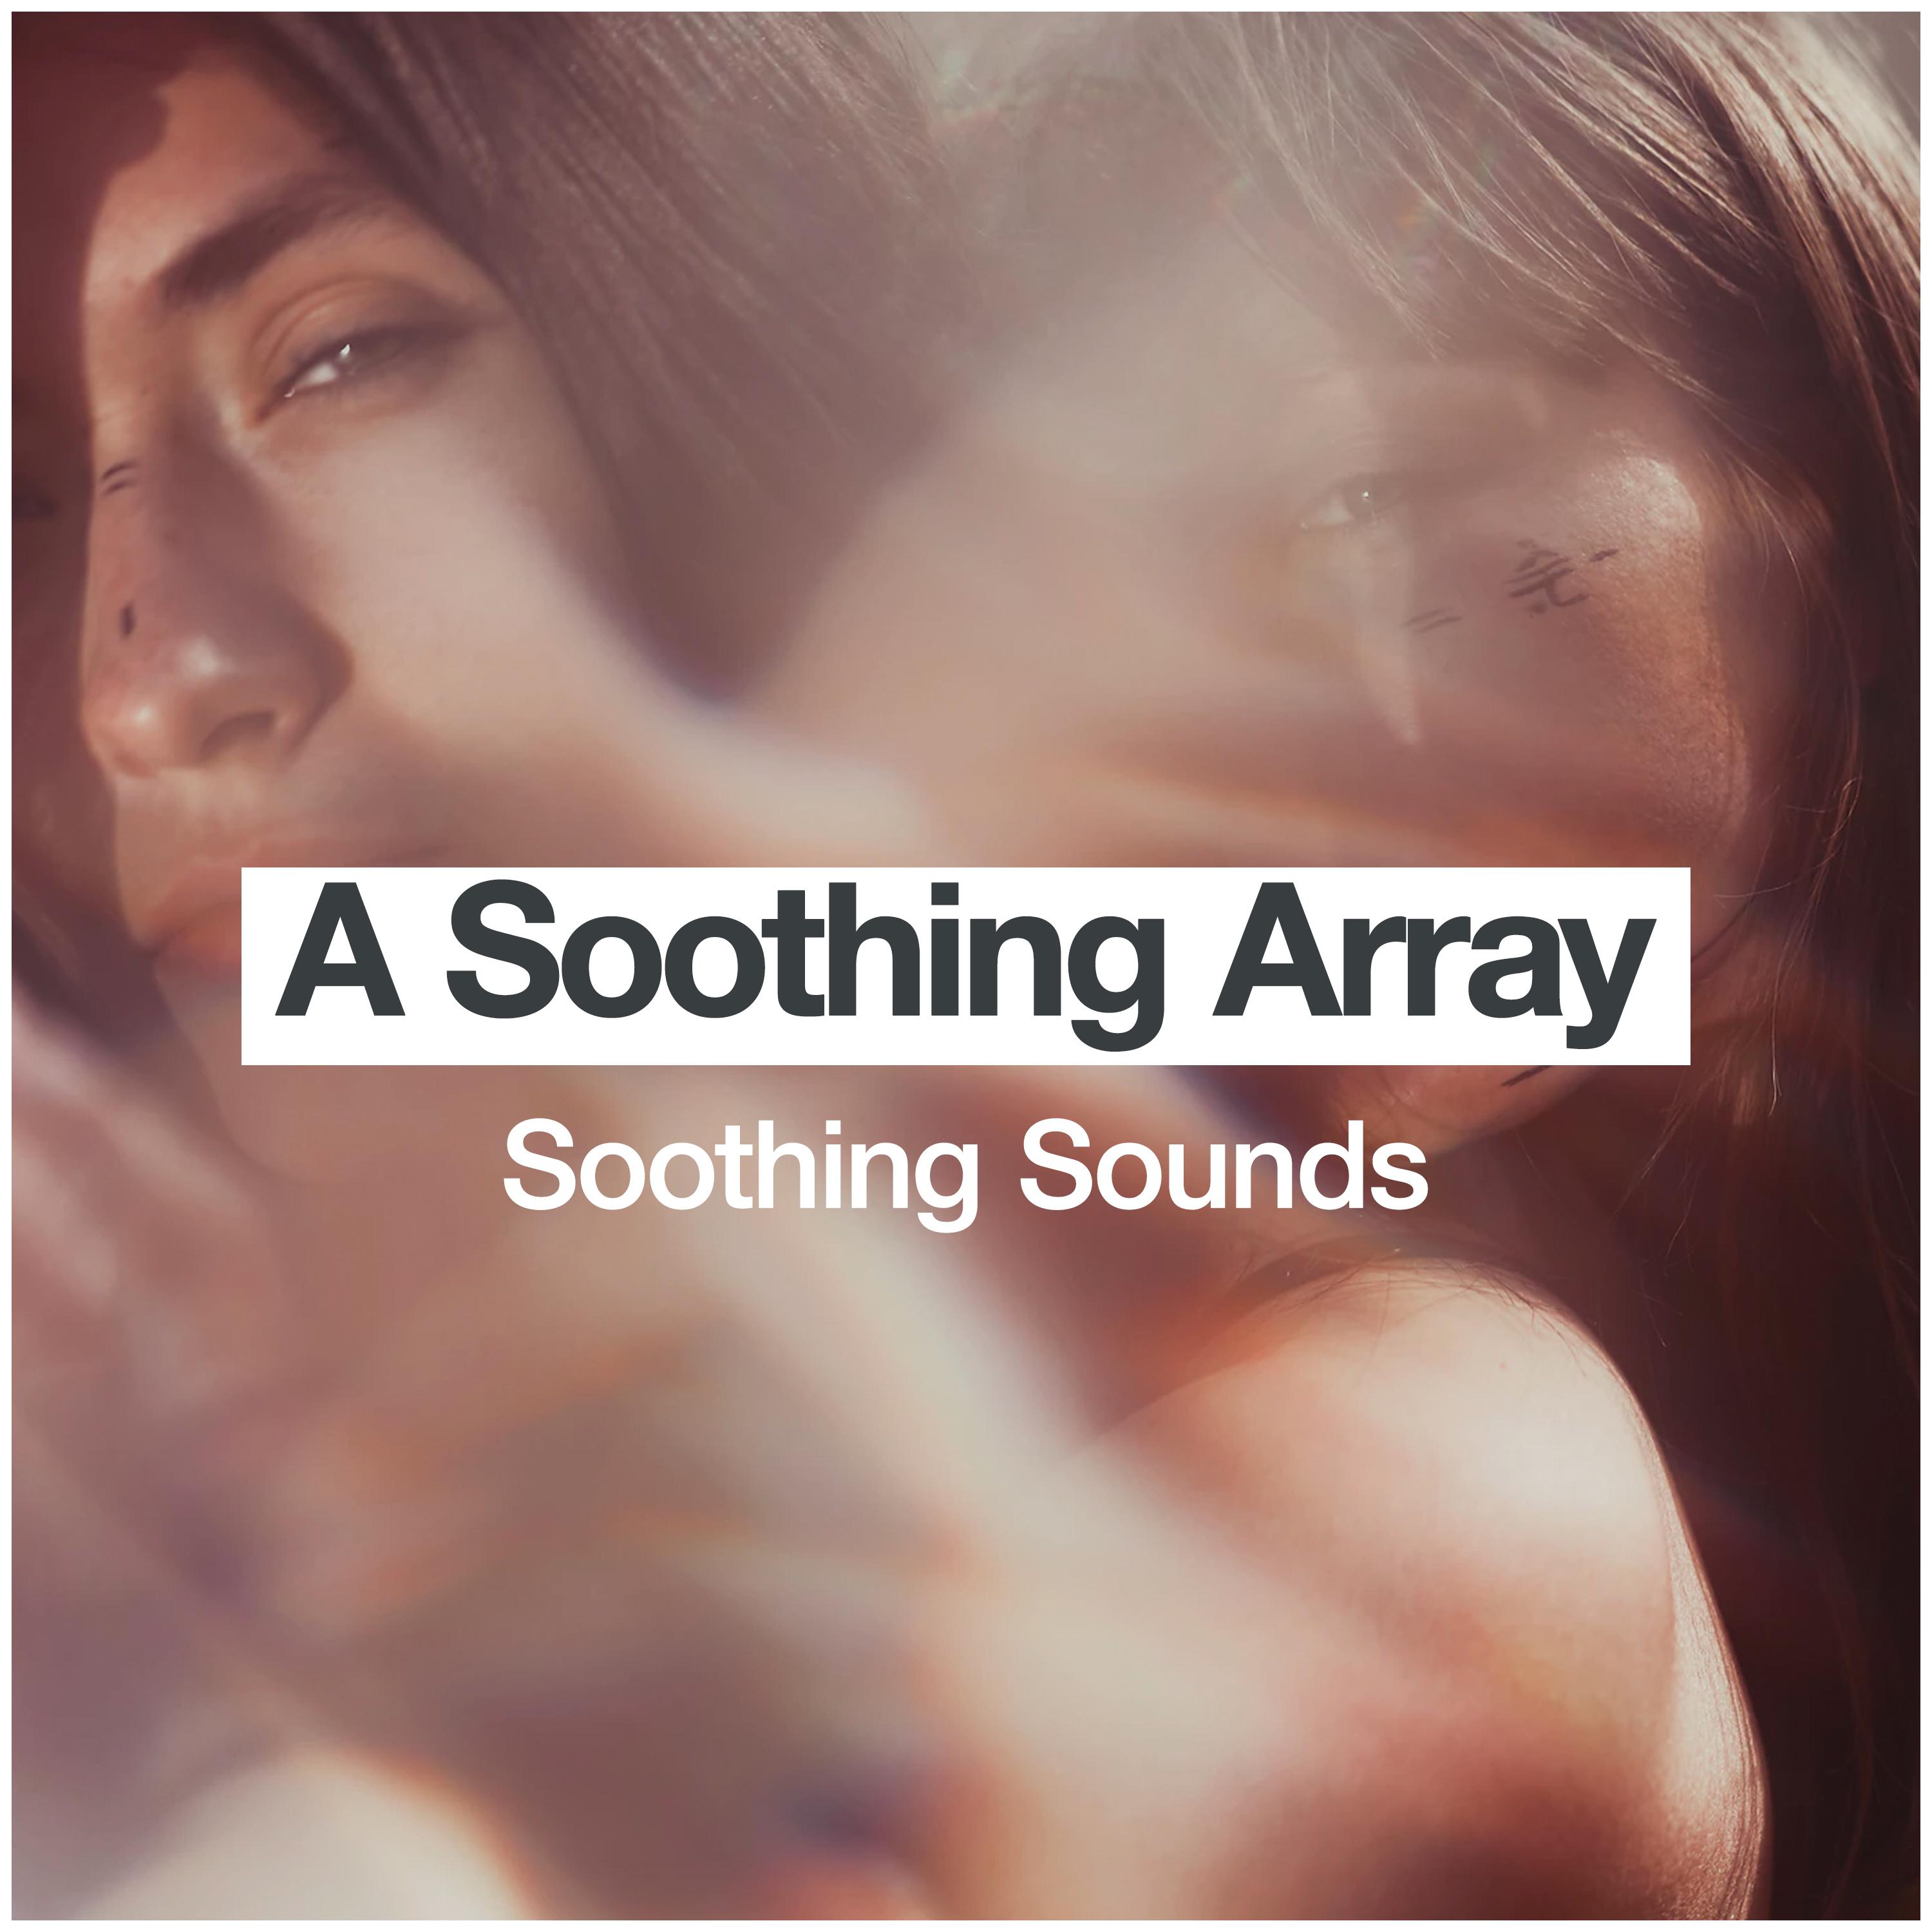 A Soothing Array